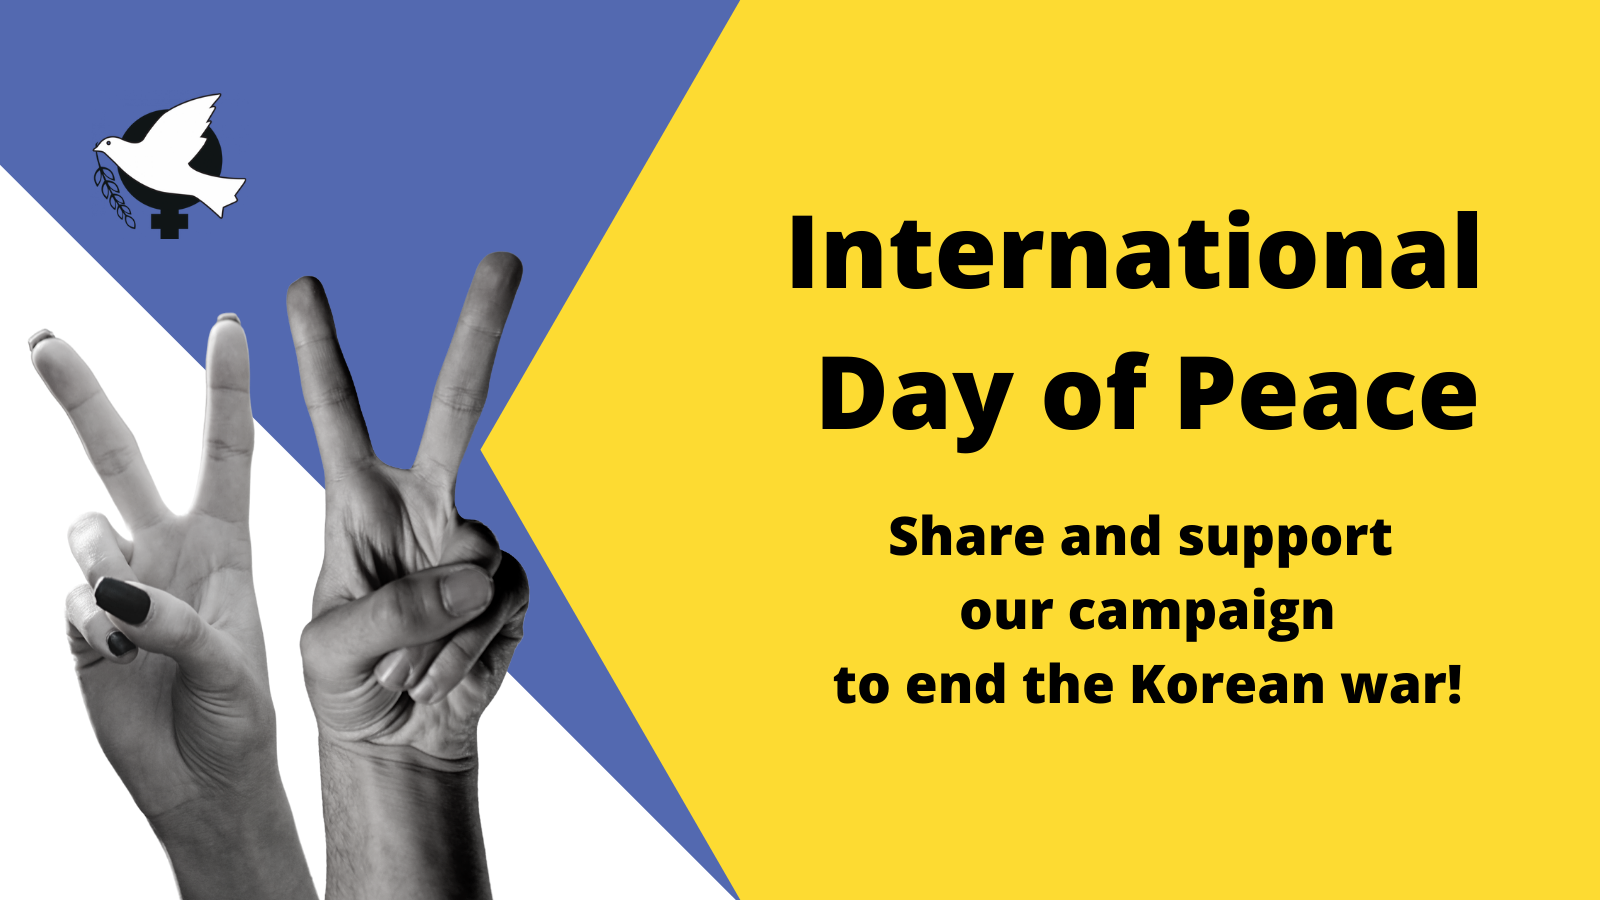 Text "International Day of Peace - share and support our campaign to stop the Korean war". Hands doing the peace sign on the left of the image.